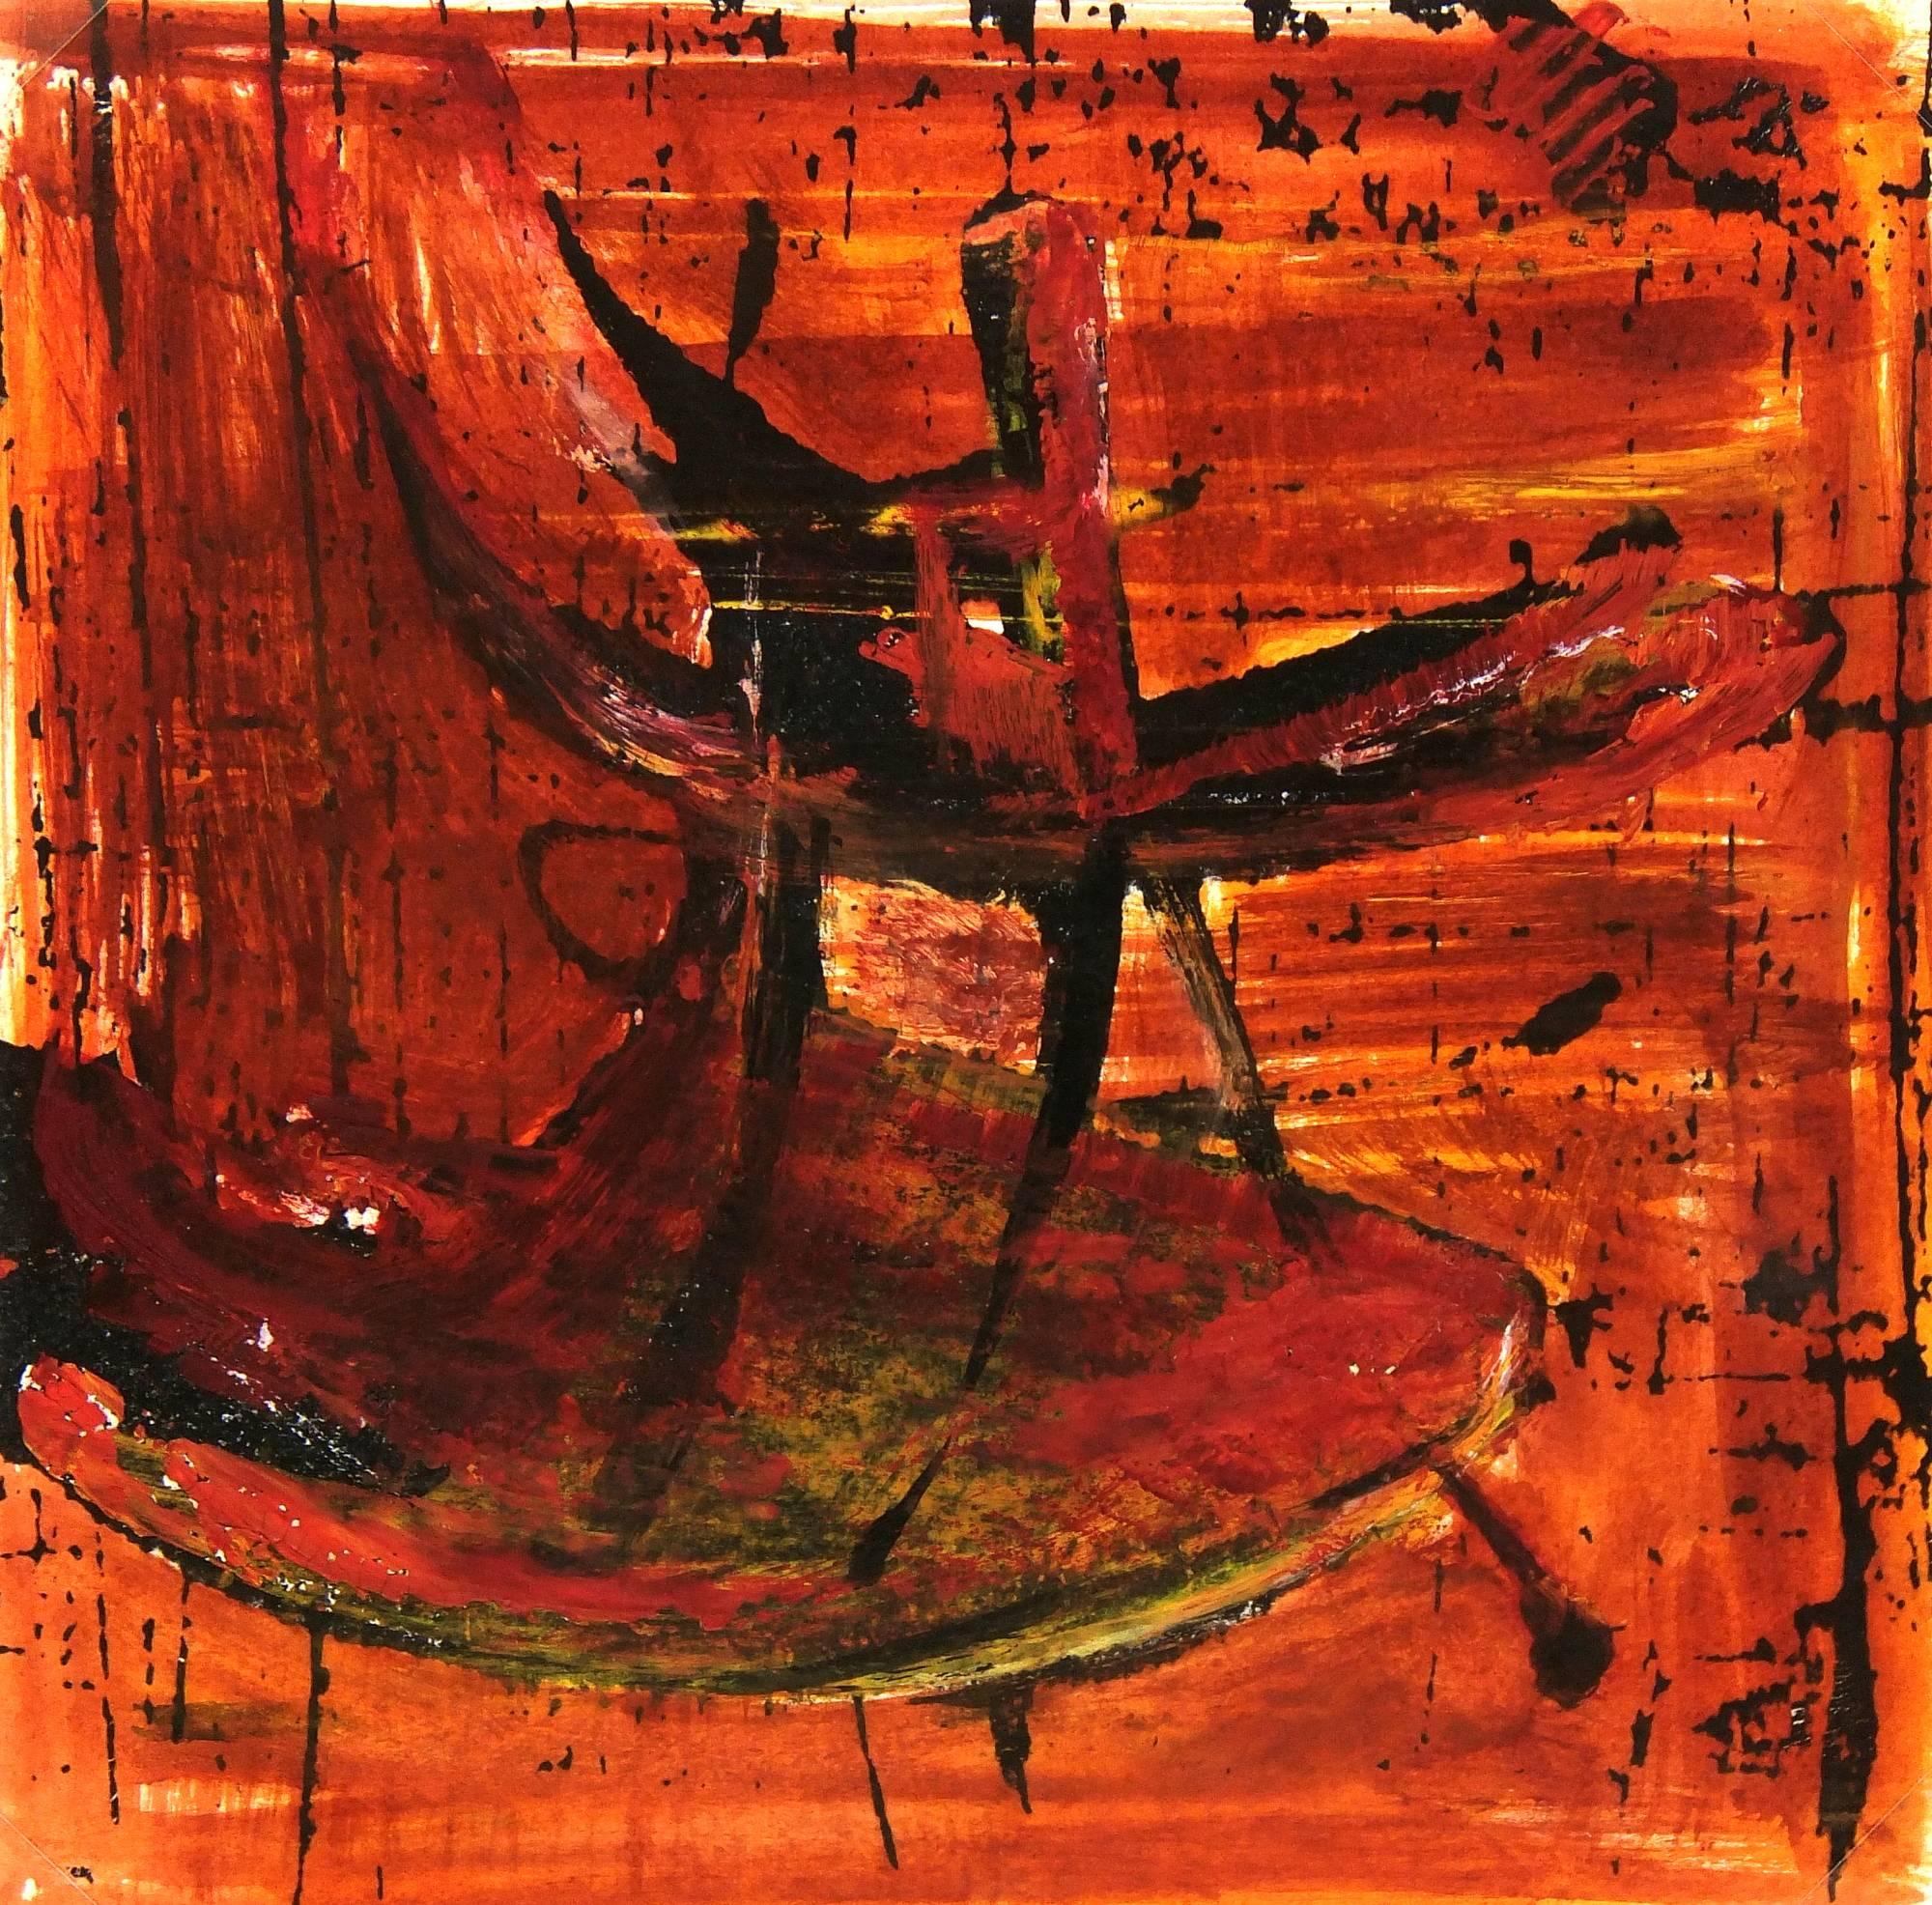 C. Heino Abstract Painting - Vibrant Red and Orange Modern Abstract